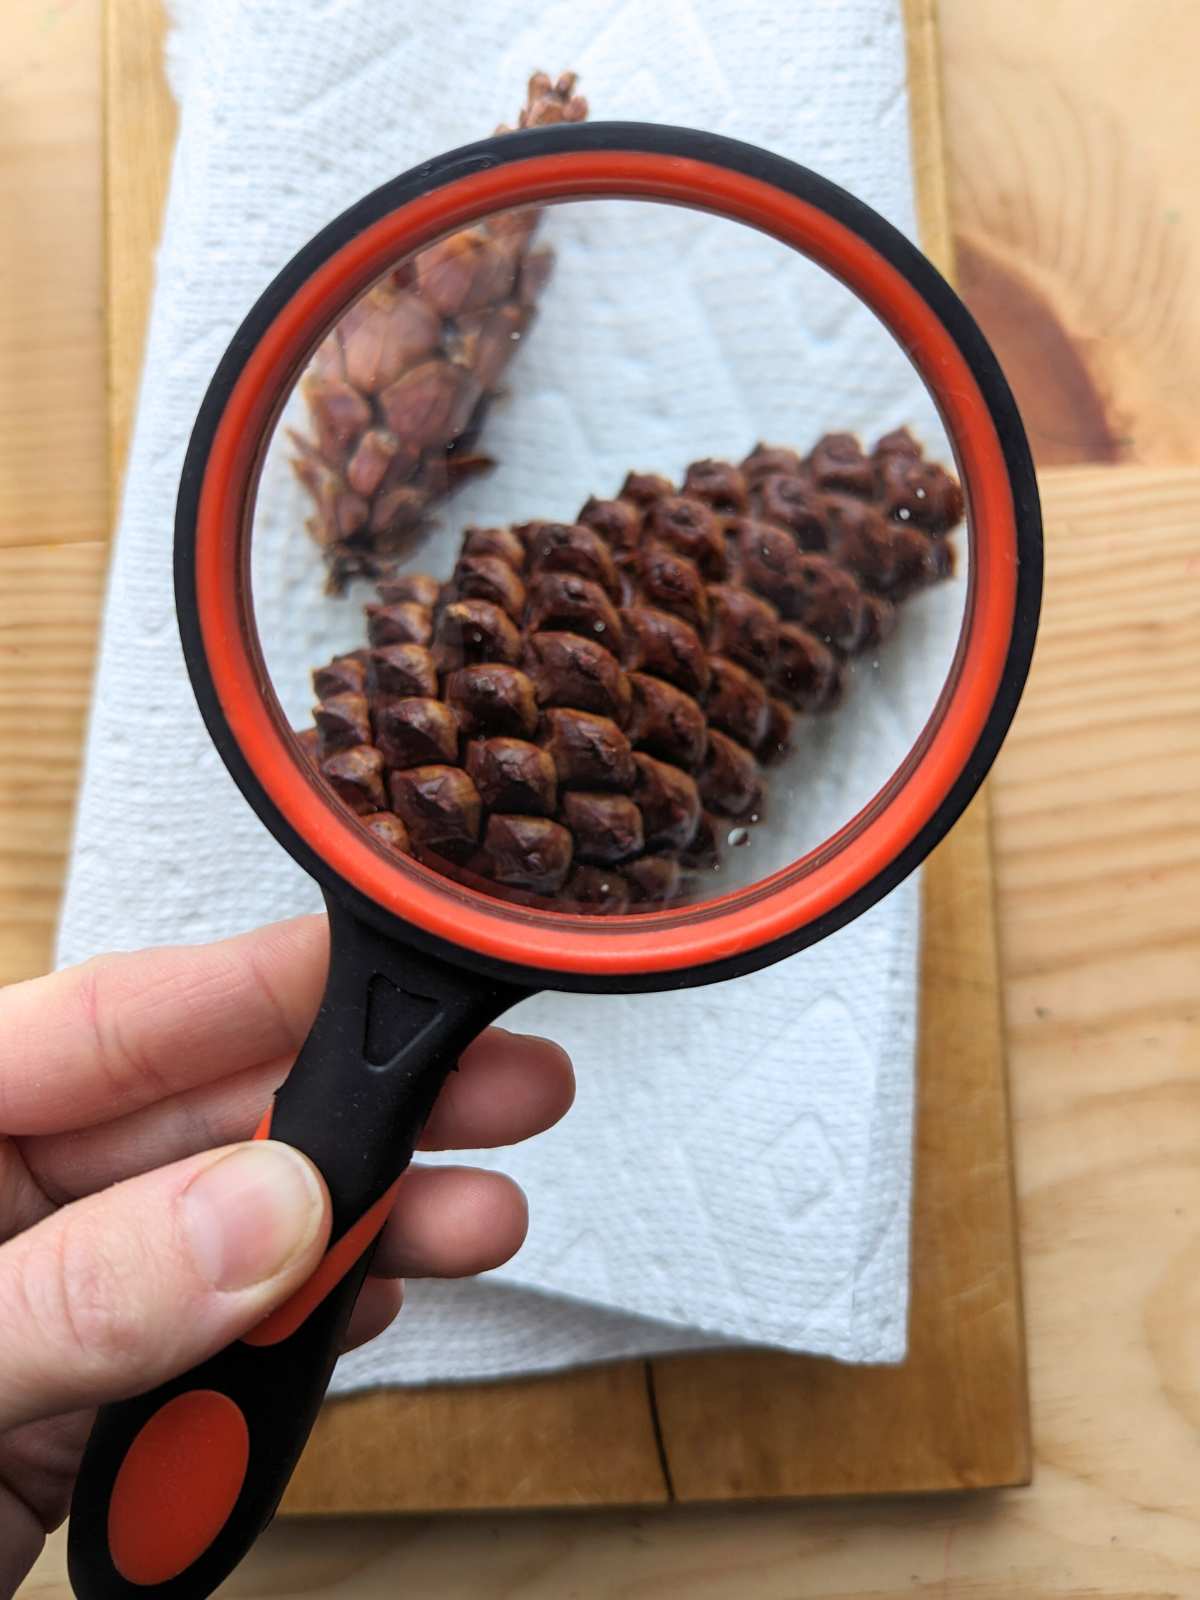 Hand on the bottom left holding a red and black magnifying lens over two closed pinecones on a white paper towel on a wooden surface.